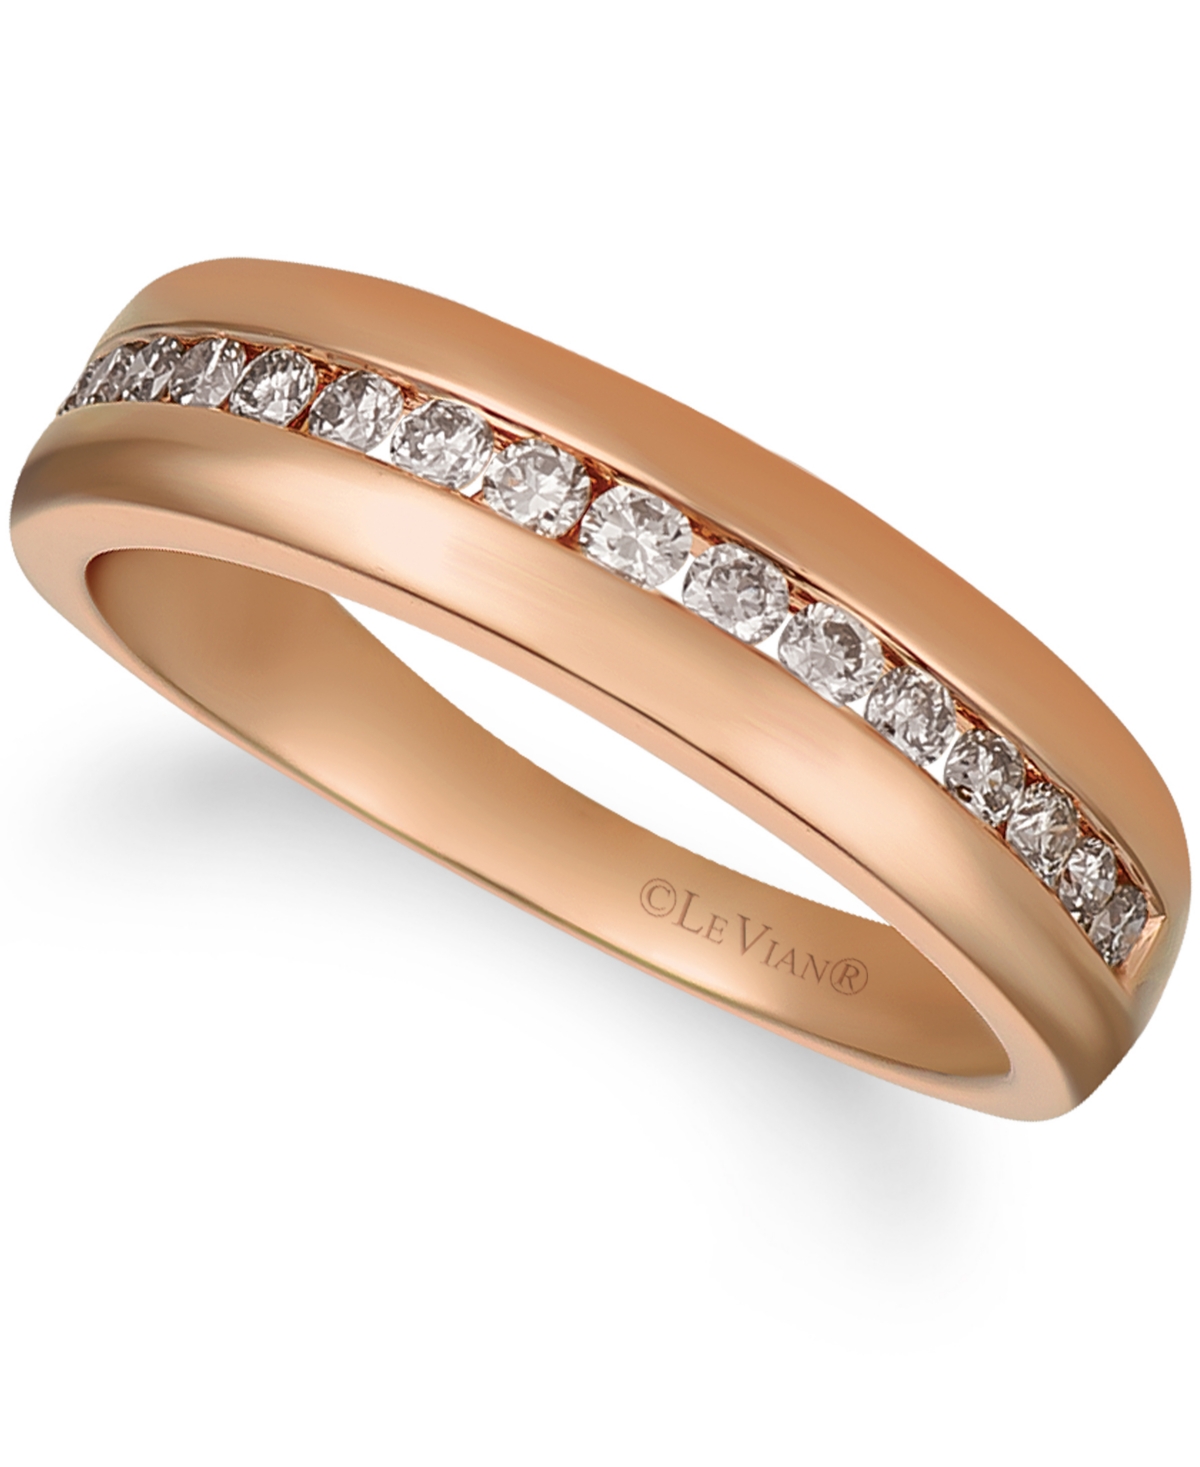 His By Le Vian Nude Diamonds (1/2 ct. t.w.) Band in 14k Rose Gold - Rose Gold